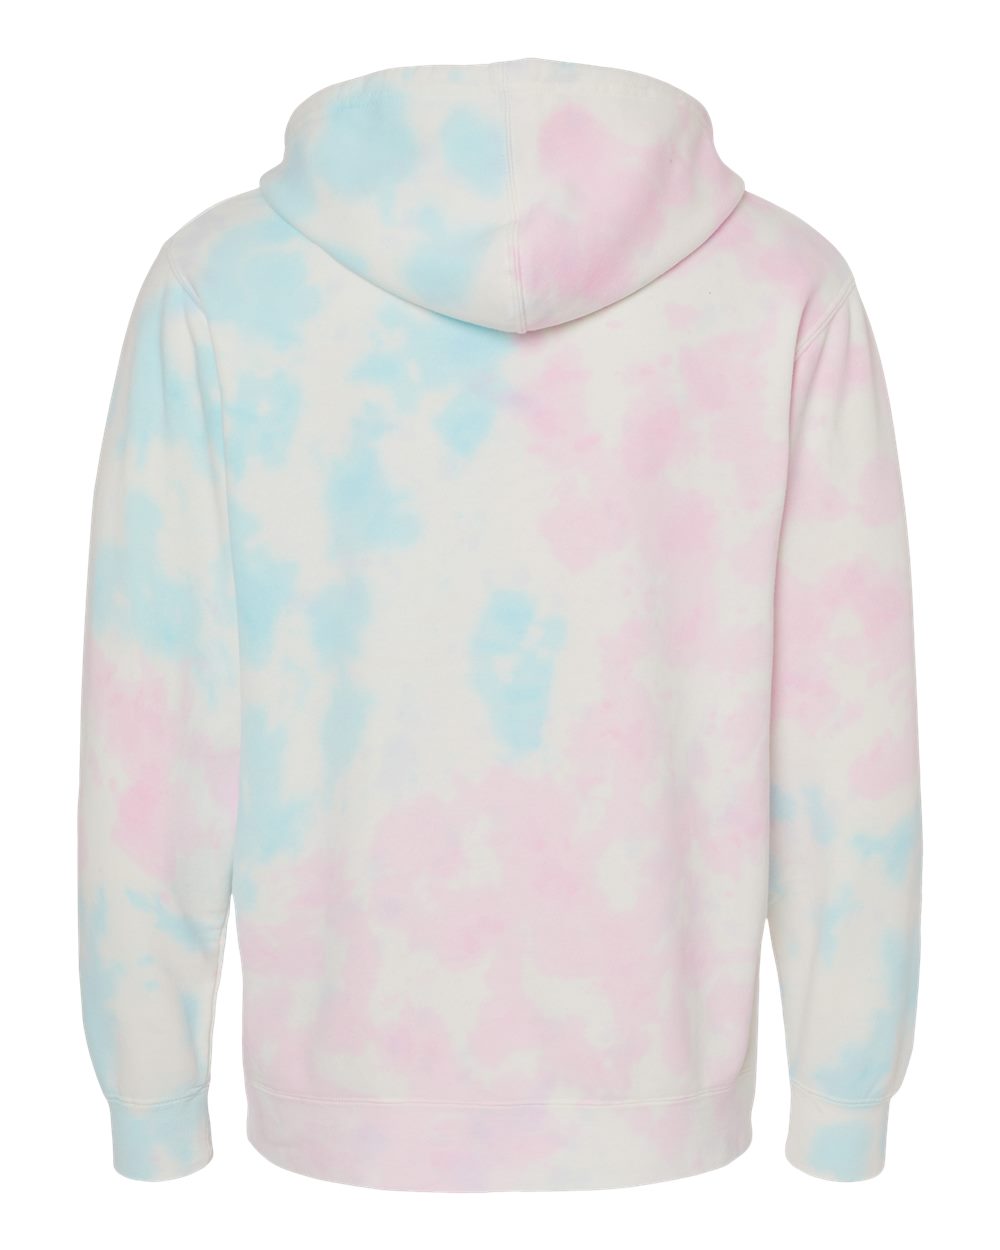 Independent Trading Co. Unisex Midweight Tie-Dyed Hooded Sweatshirt PRM4500TD #color_Tie Dye Cotton Candy